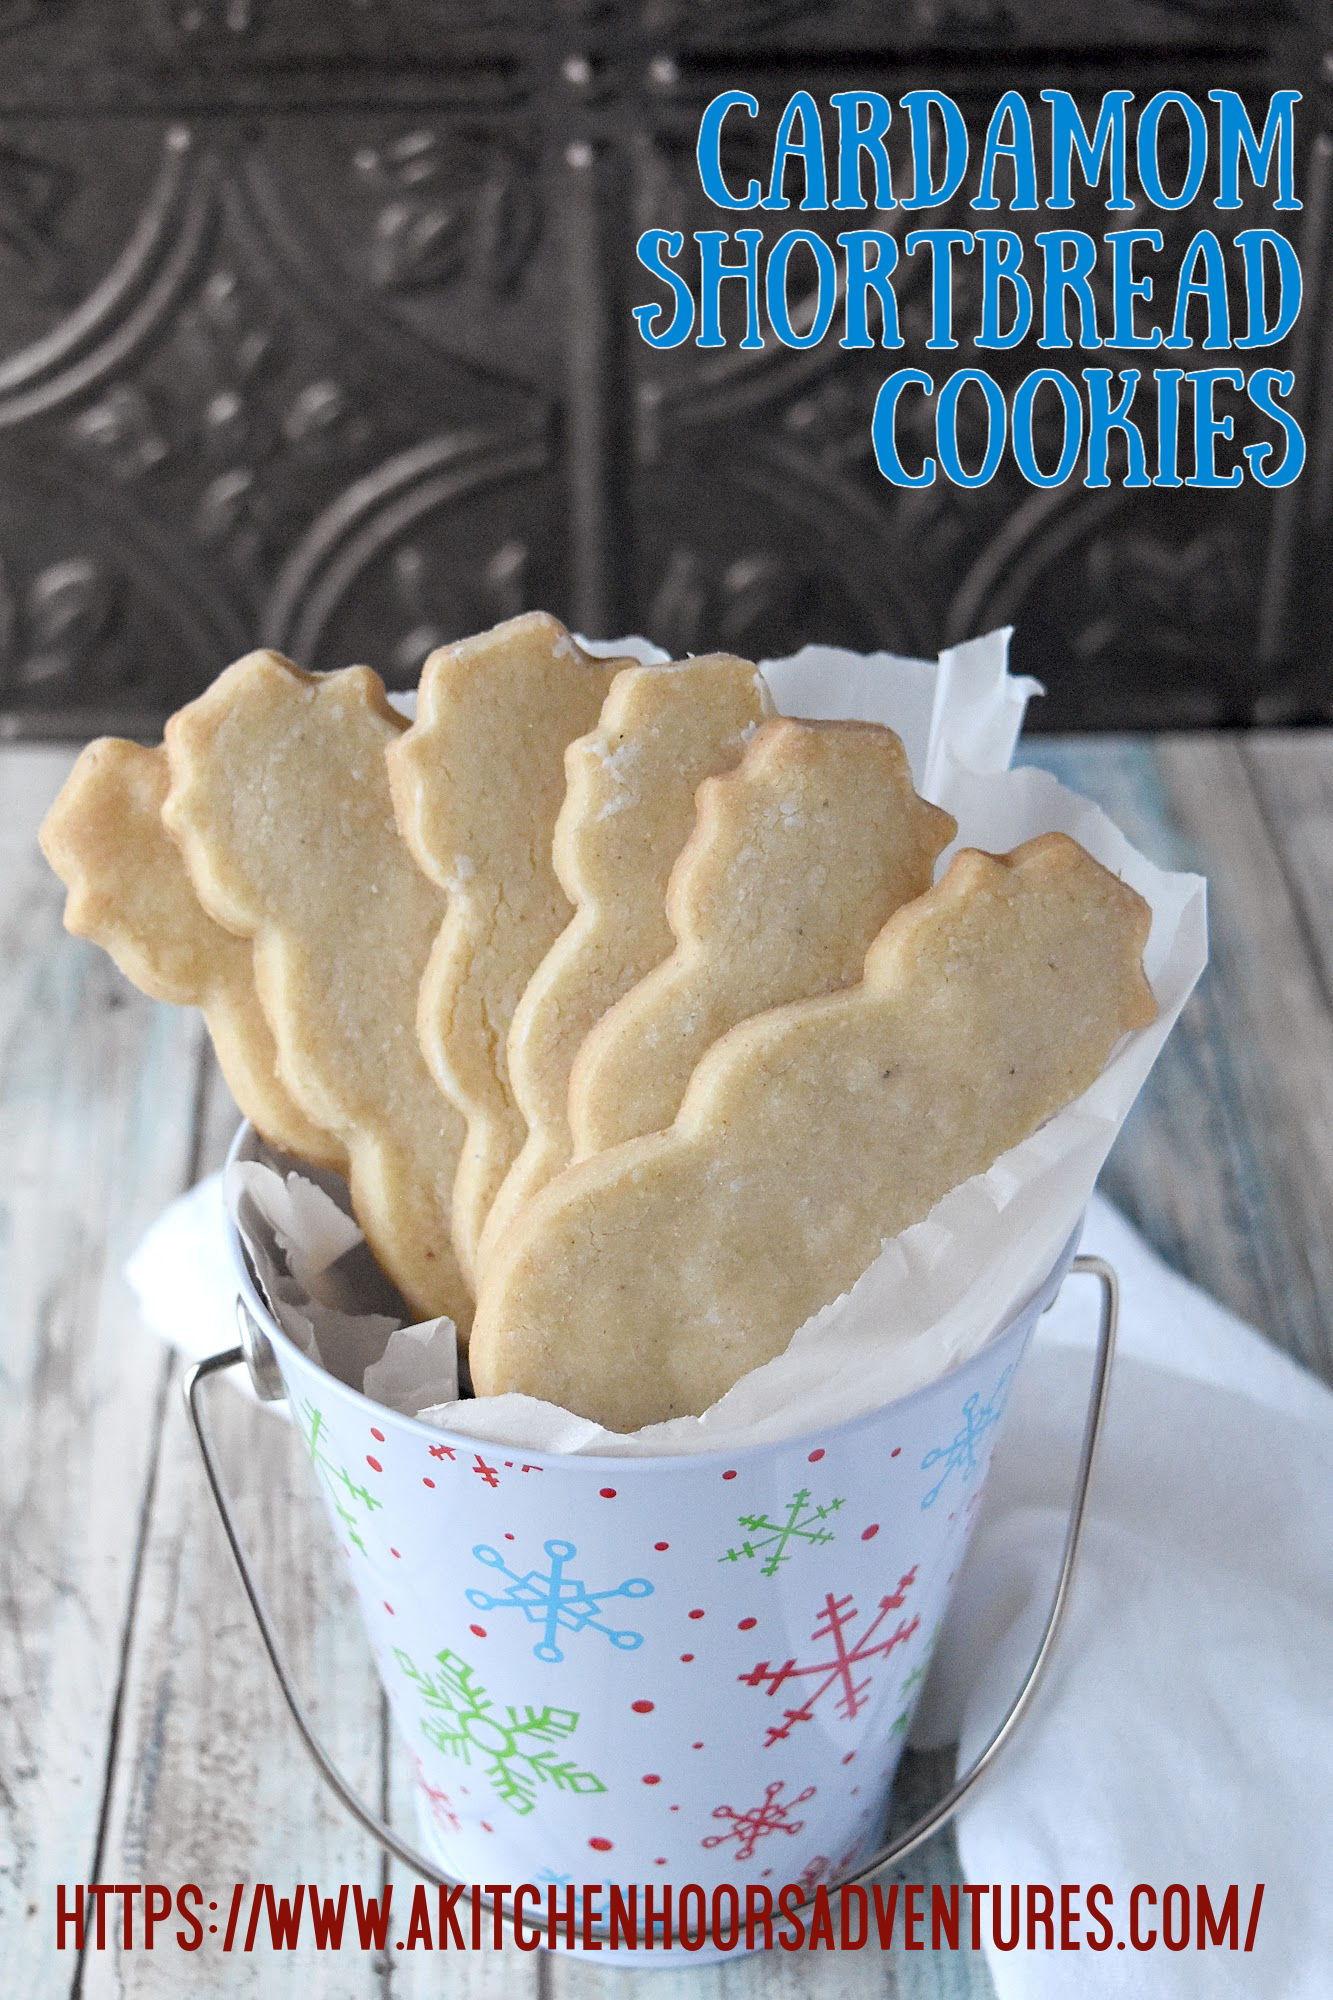 Cardamom Shortbread Cookies are tender, flaky, and have a delicious cardamom flavor with a hint of cinnamon.  If you really like cardamom, then you’ll love these cookies. #ChristmasCookies #shortbreadcookies #cardamom #cutoutcookies